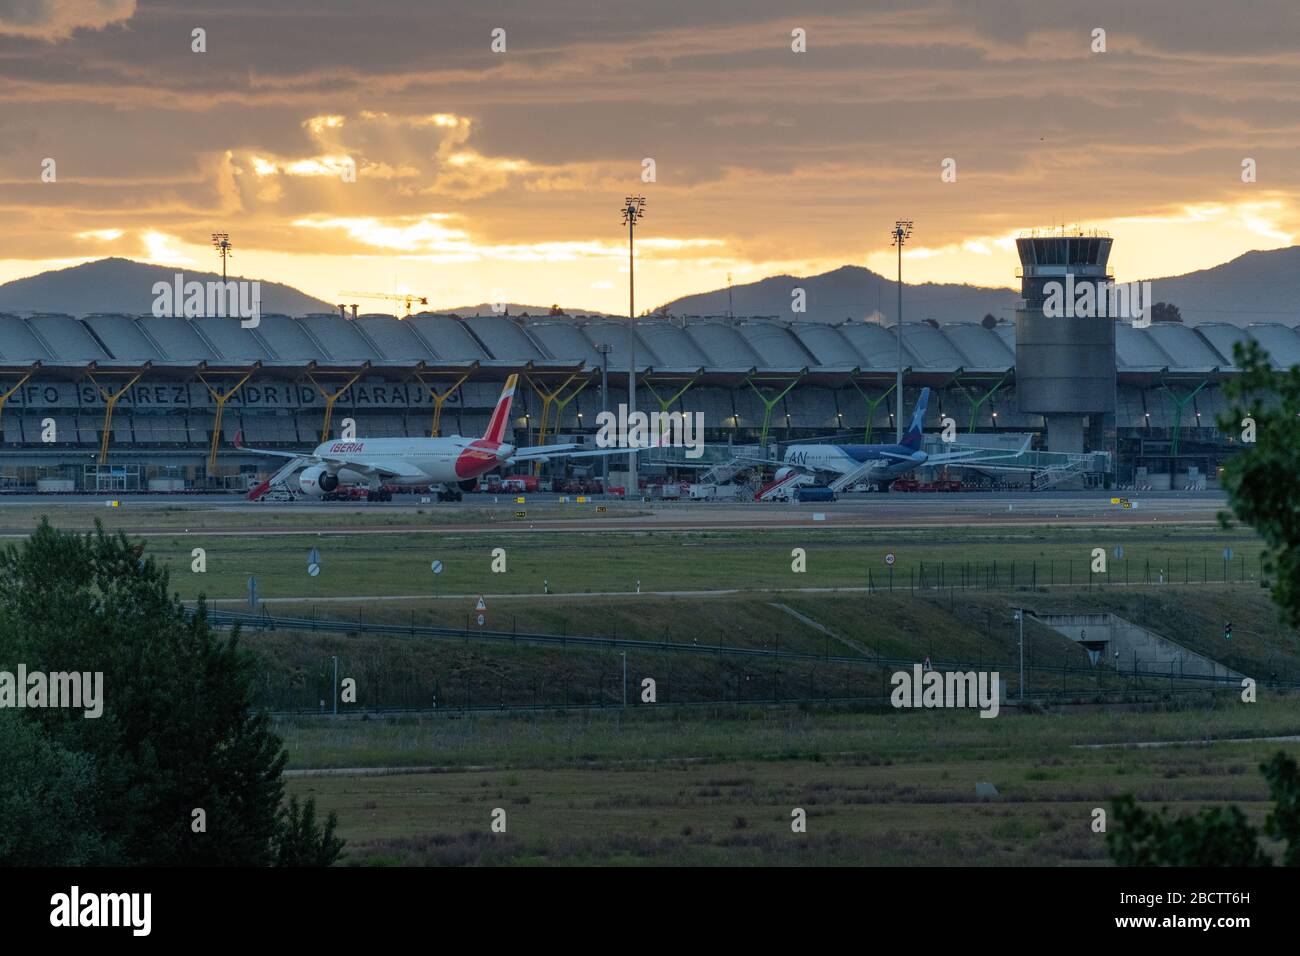 MADRID, SPAIN - MAY 17, 2019: Airplanes of different air companies in the terminal T4 of the international airport Adolfo Suarez Madrid-Barajas, at su Stock Photo